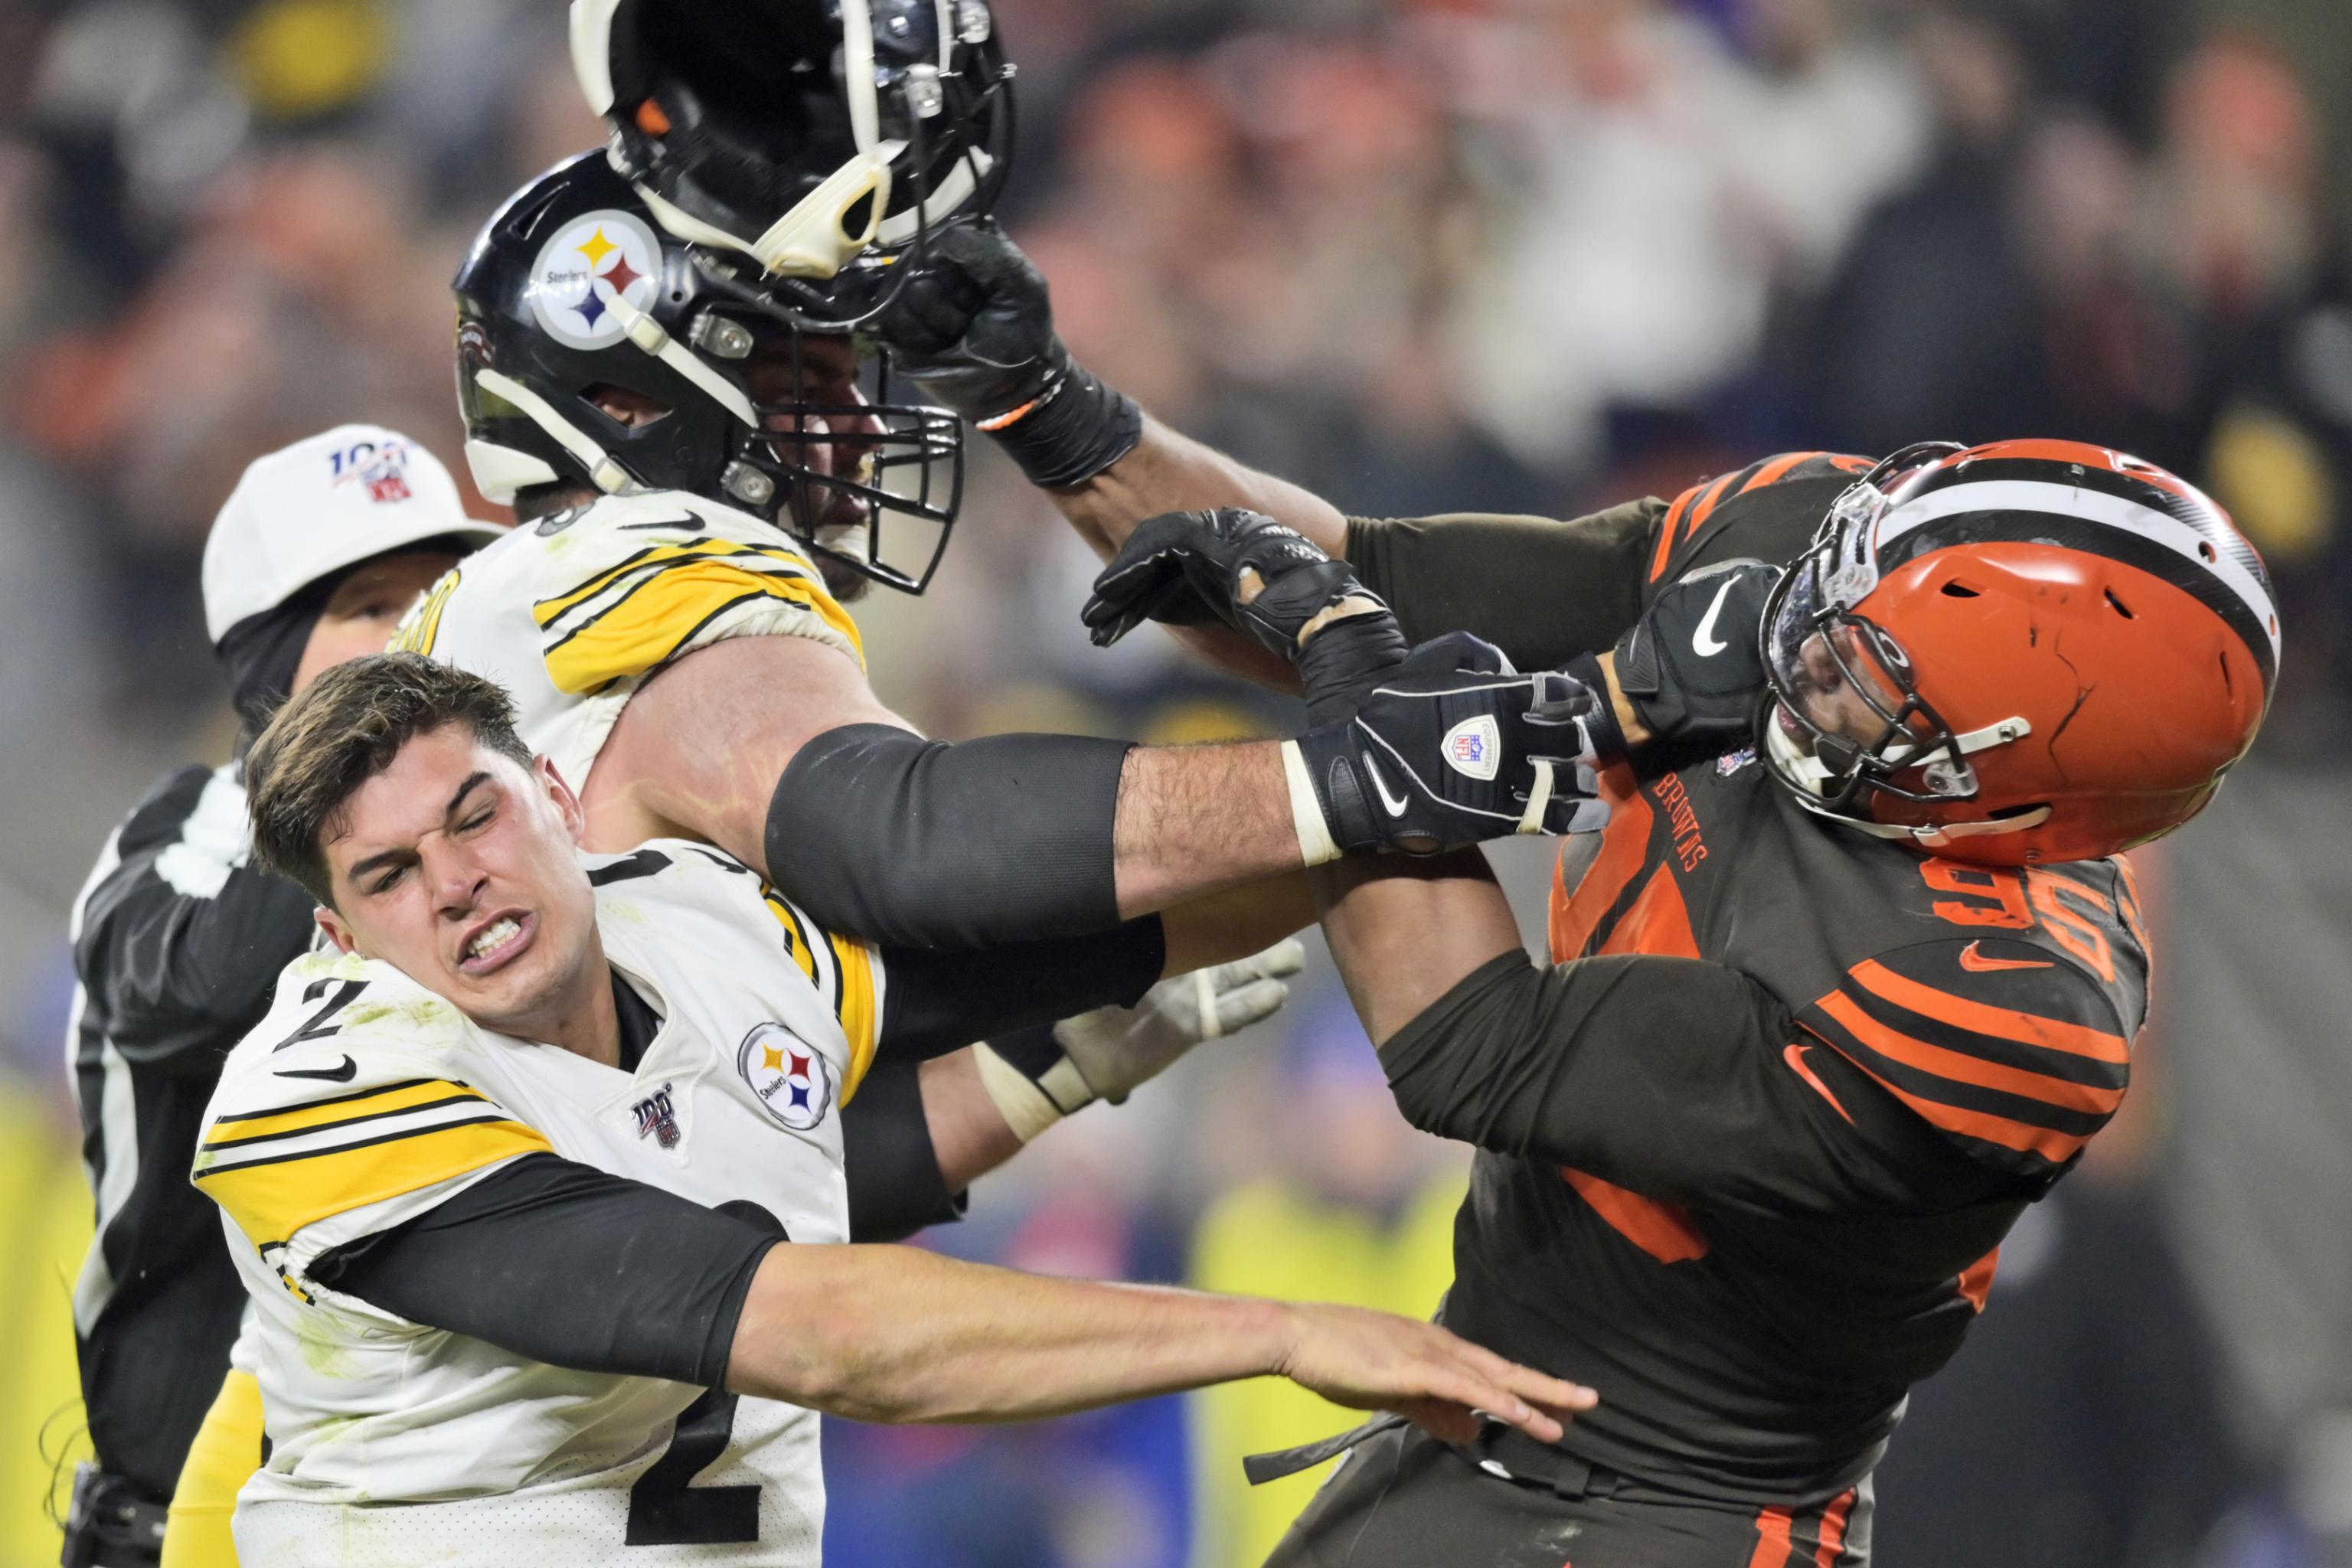 33 Players Disciplined 732 422 In Total Fines For Steelers Browns Brawl Bleacher Report Latest News Videos And Highlights - who received suspensions in steeler brown brawl stars